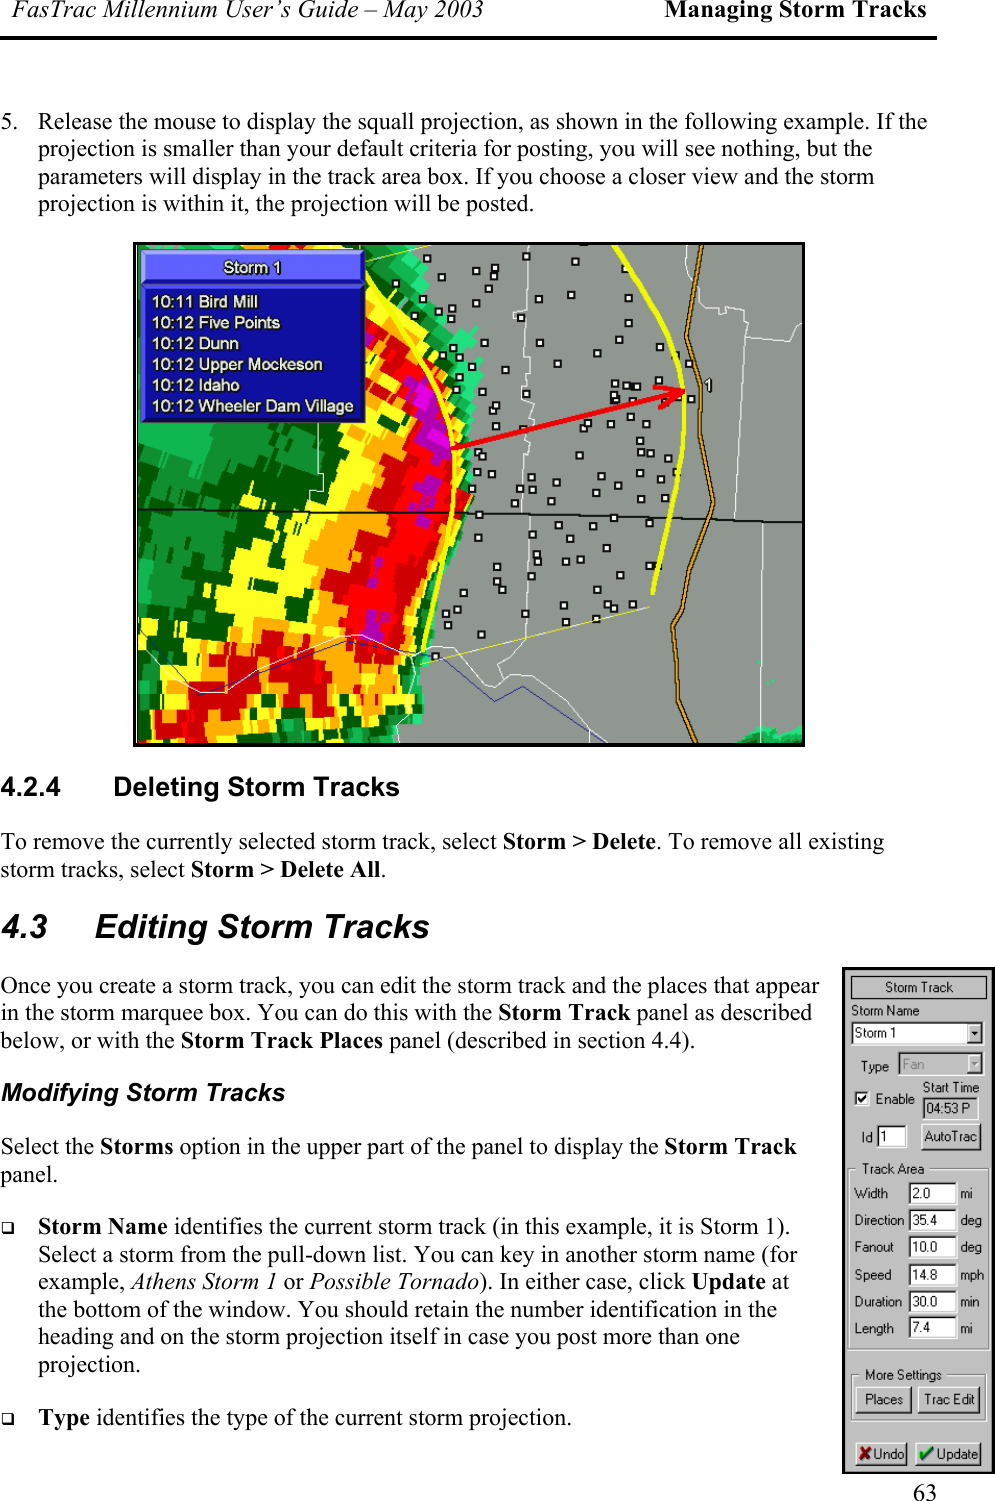 FasTrac Millennium User’s Guide – May 2003 Managing Storm Tracks 5.  Release the mouse to display the squall projection, as shown in the following example. If the projection is smaller than your default criteria for posting, you will see nothing, but the parameters will display in the track area box. If you choose a closer view and the storm projection is within it, the projection will be posted.  4.2.4  Deleting Storm Tracks To remove the currently selected storm track, select Storm &gt; Delete. To remove all existing storm tracks, select Storm &gt; Delete All. 4.3  Editing Storm Tracks Once you create a storm track, you can edit the storm track and the places that appear in the storm marquee box. You can do this with the Storm Track panel as described below, or with the Storm Track Places panel (described in section 4.4). Modifying Storm Tracks Select the Storms option in the upper part of the panel to display the Storm Track panel.    Storm Name identifies the current storm track (in this example, it is Storm 1). Select a storm from the pull-down list. You can key in another storm name (for example, Athens Storm 1 or Possible Tornado). In either case, click Update at the bottom of the window. You should retain the number identification in the heading and on the storm projection itself in case you post more than one projection.    Type identifies the type of the current storm projection. 63 